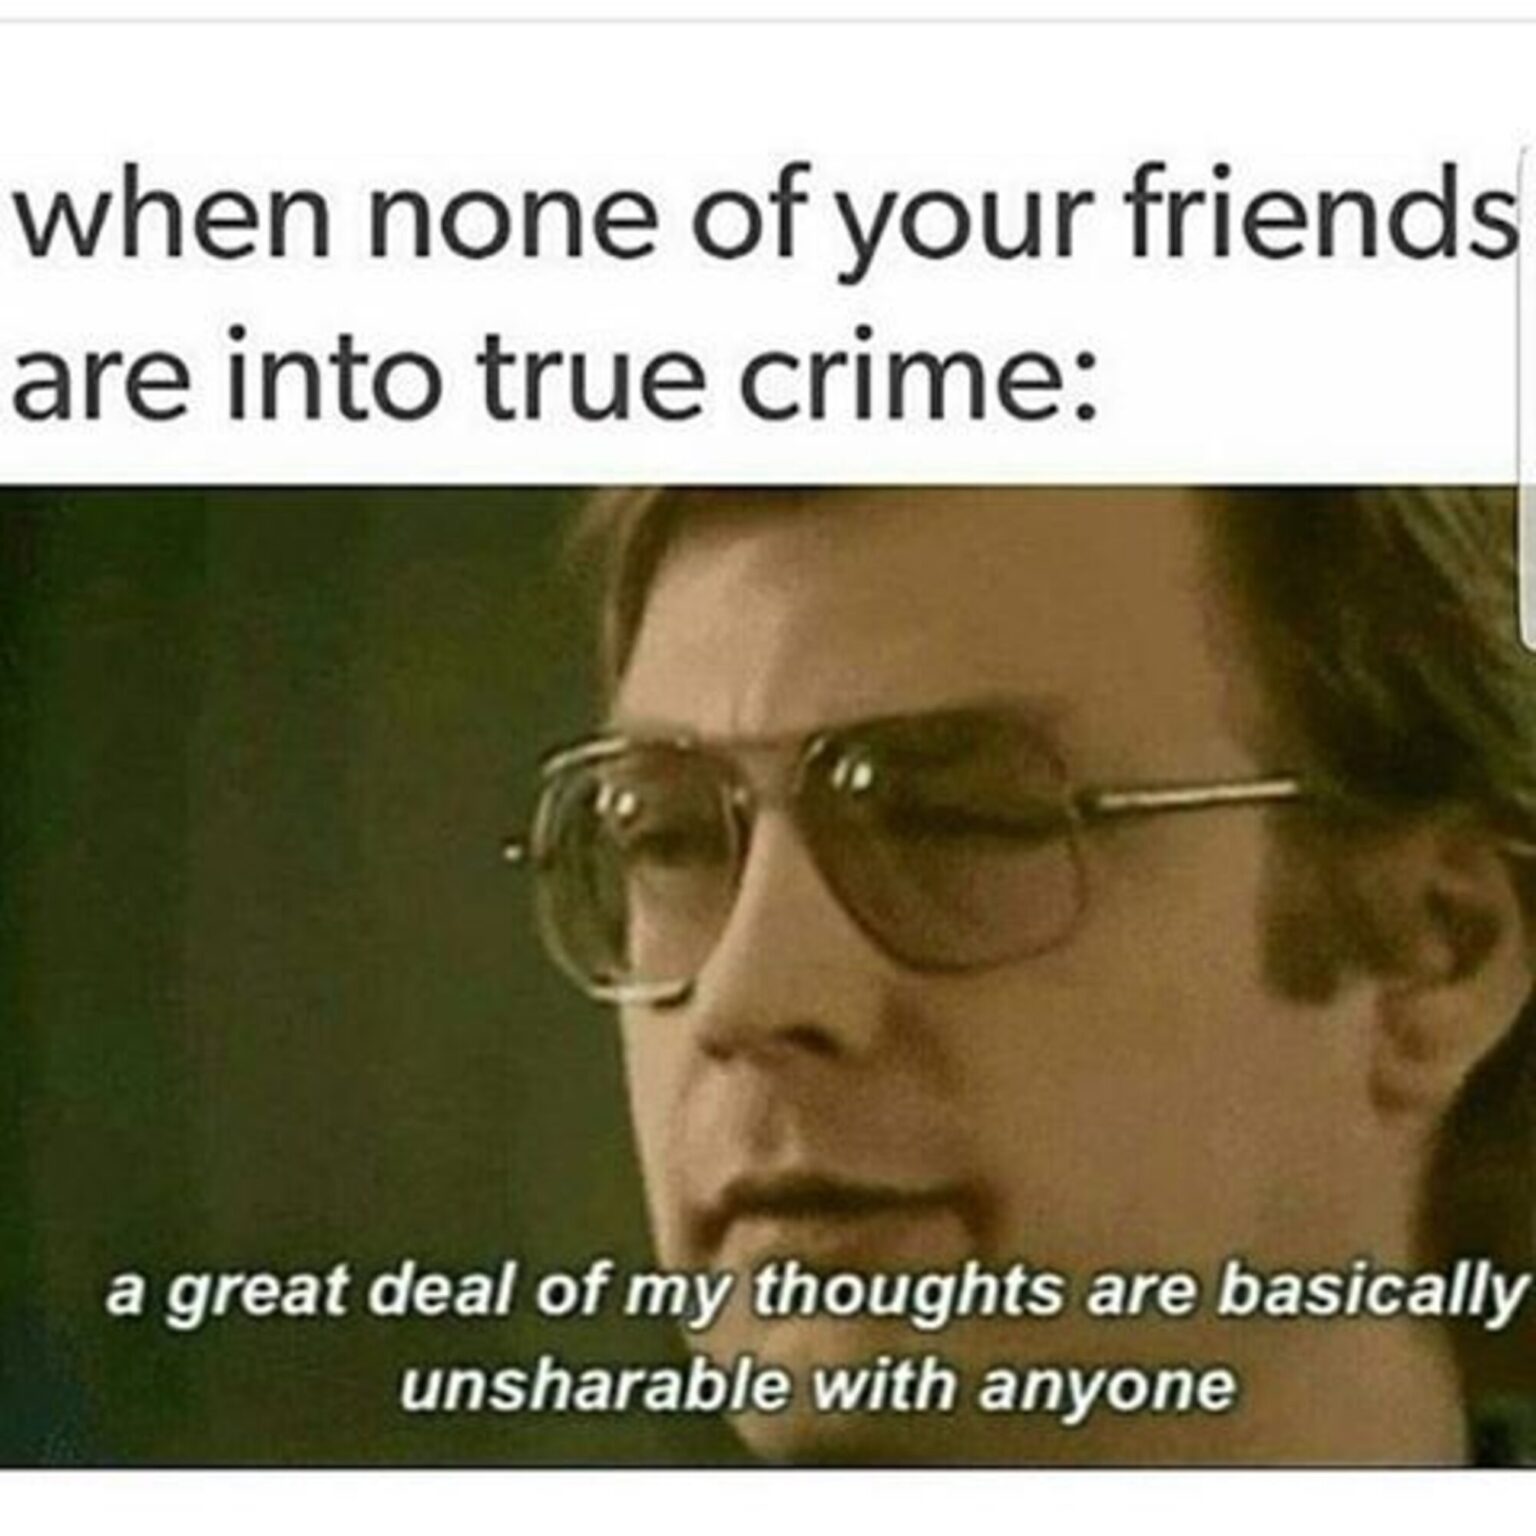 Are you a fellow lover of true crime? Can't get enough of true crime podcasts and documentaries? Laugh along at all the best true crime memes here.